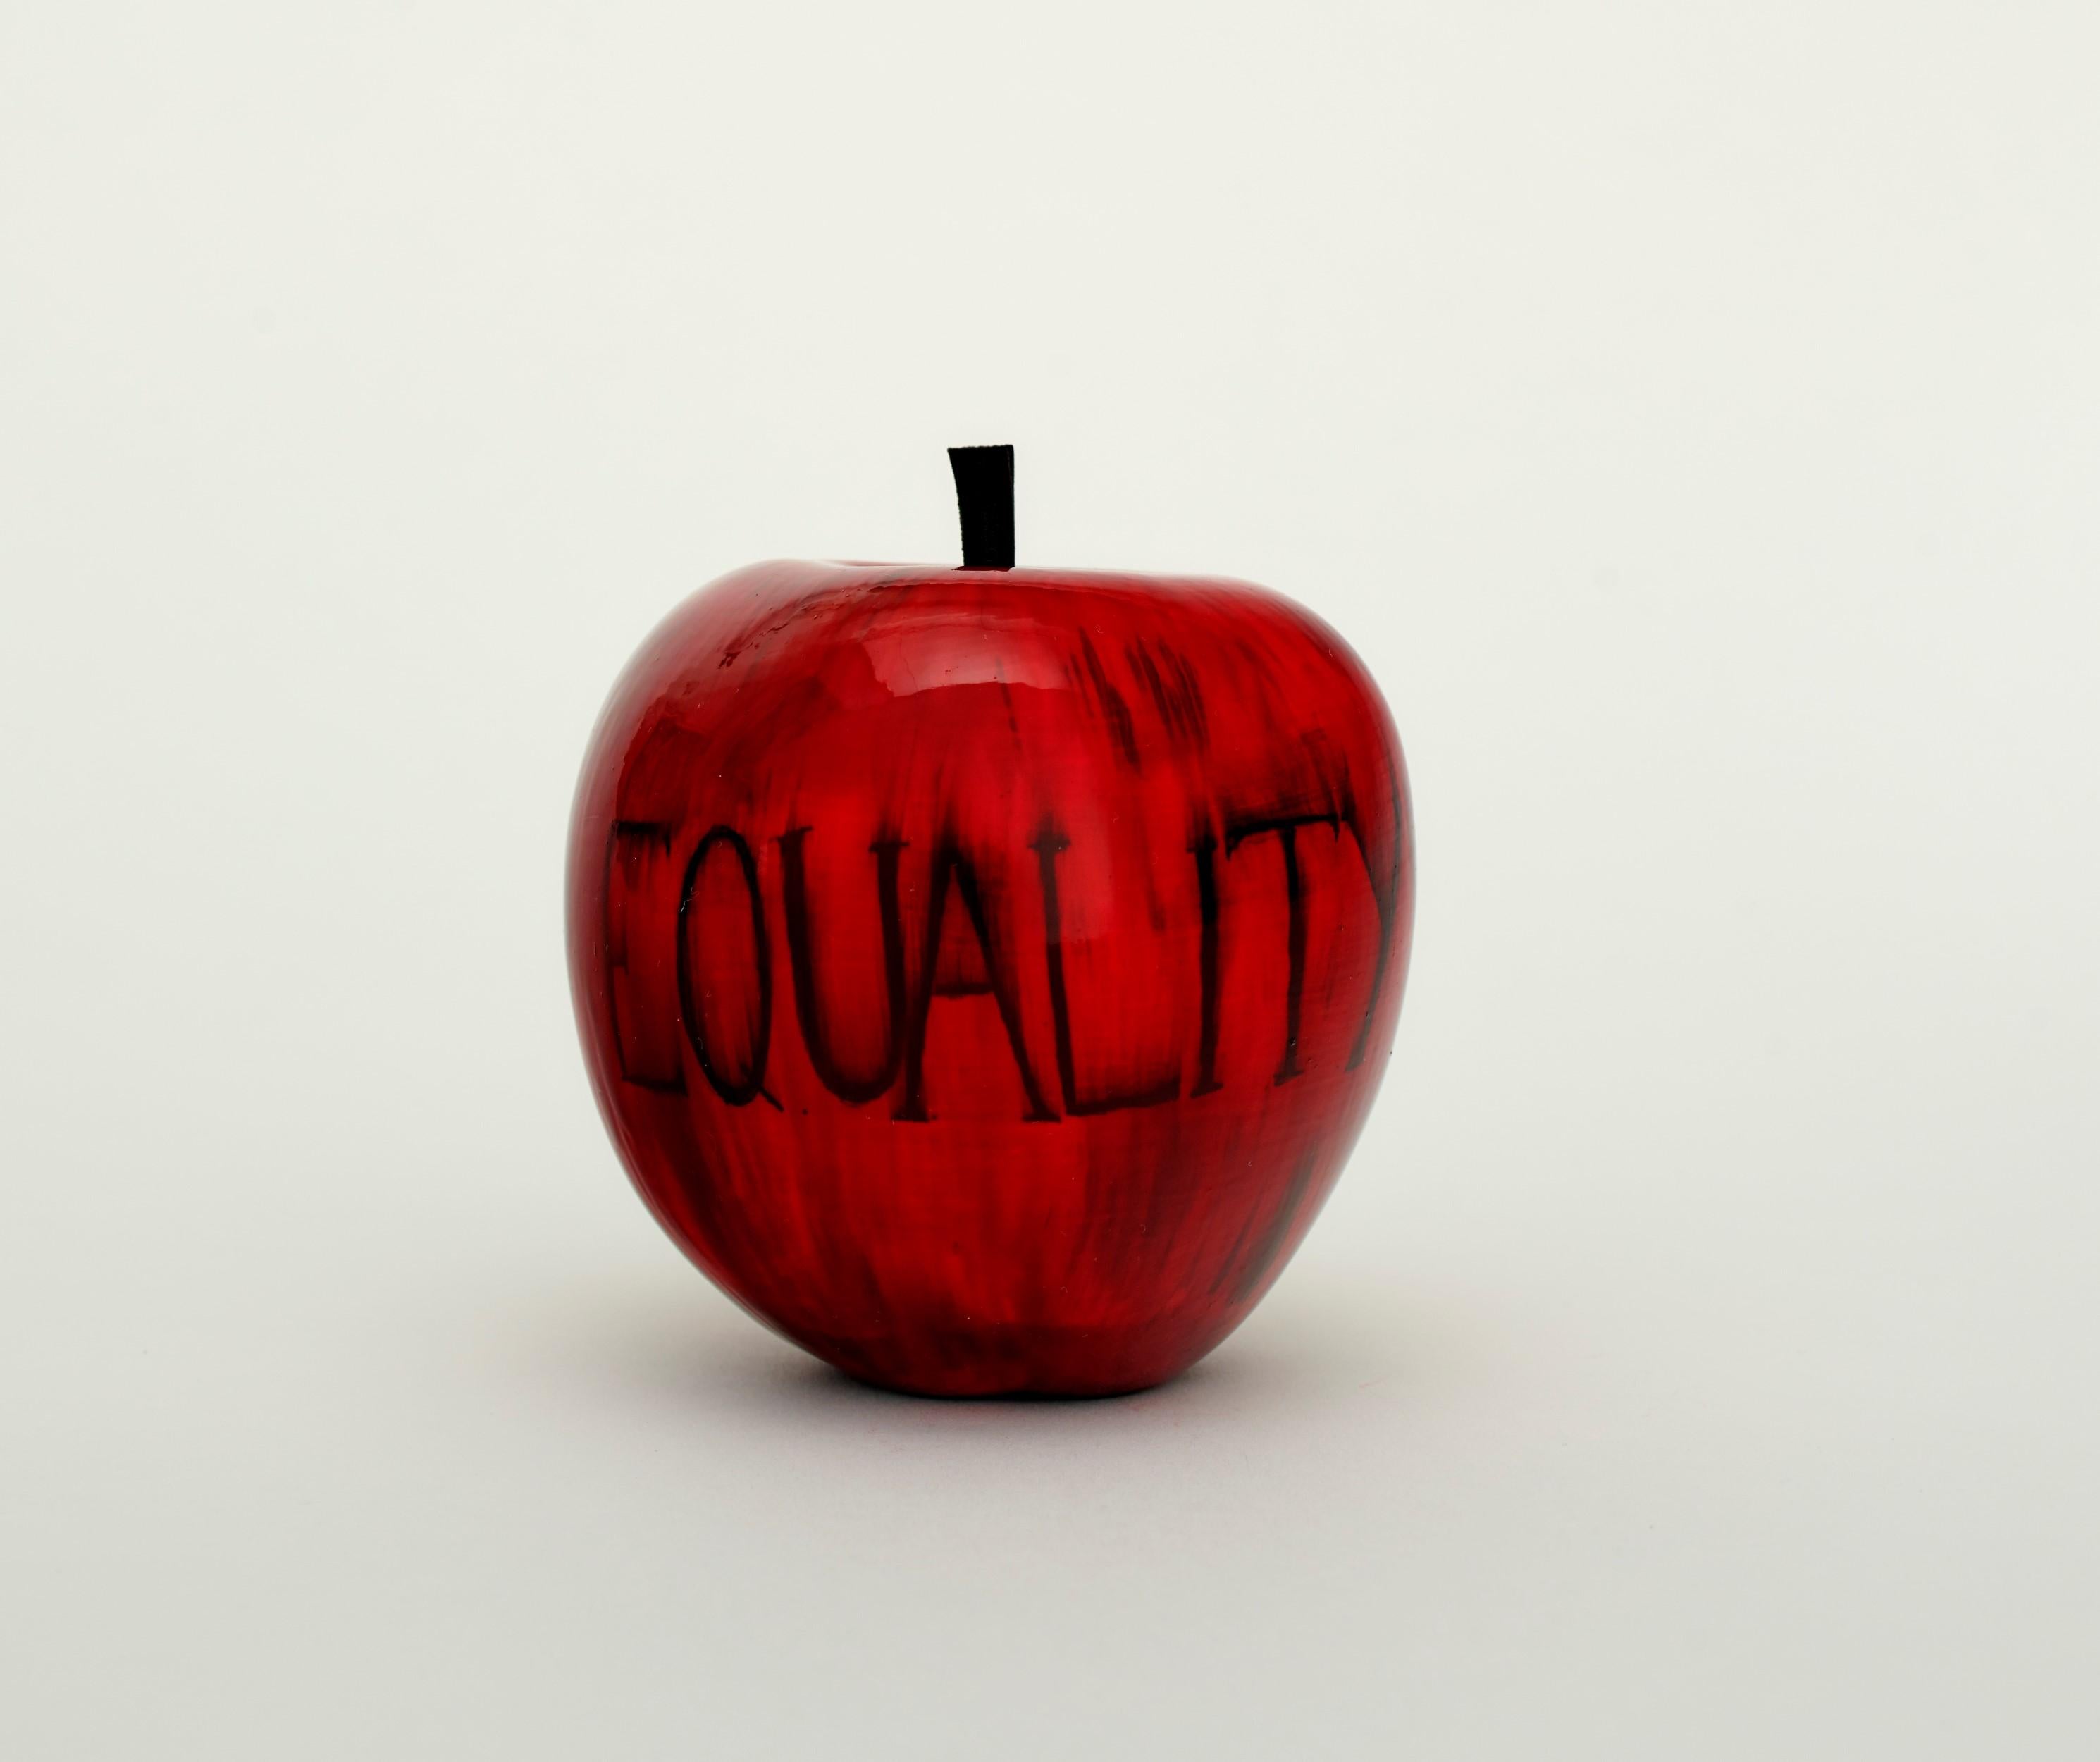 Barnaby Barford Figurative Sculpture - Equality (Apple)